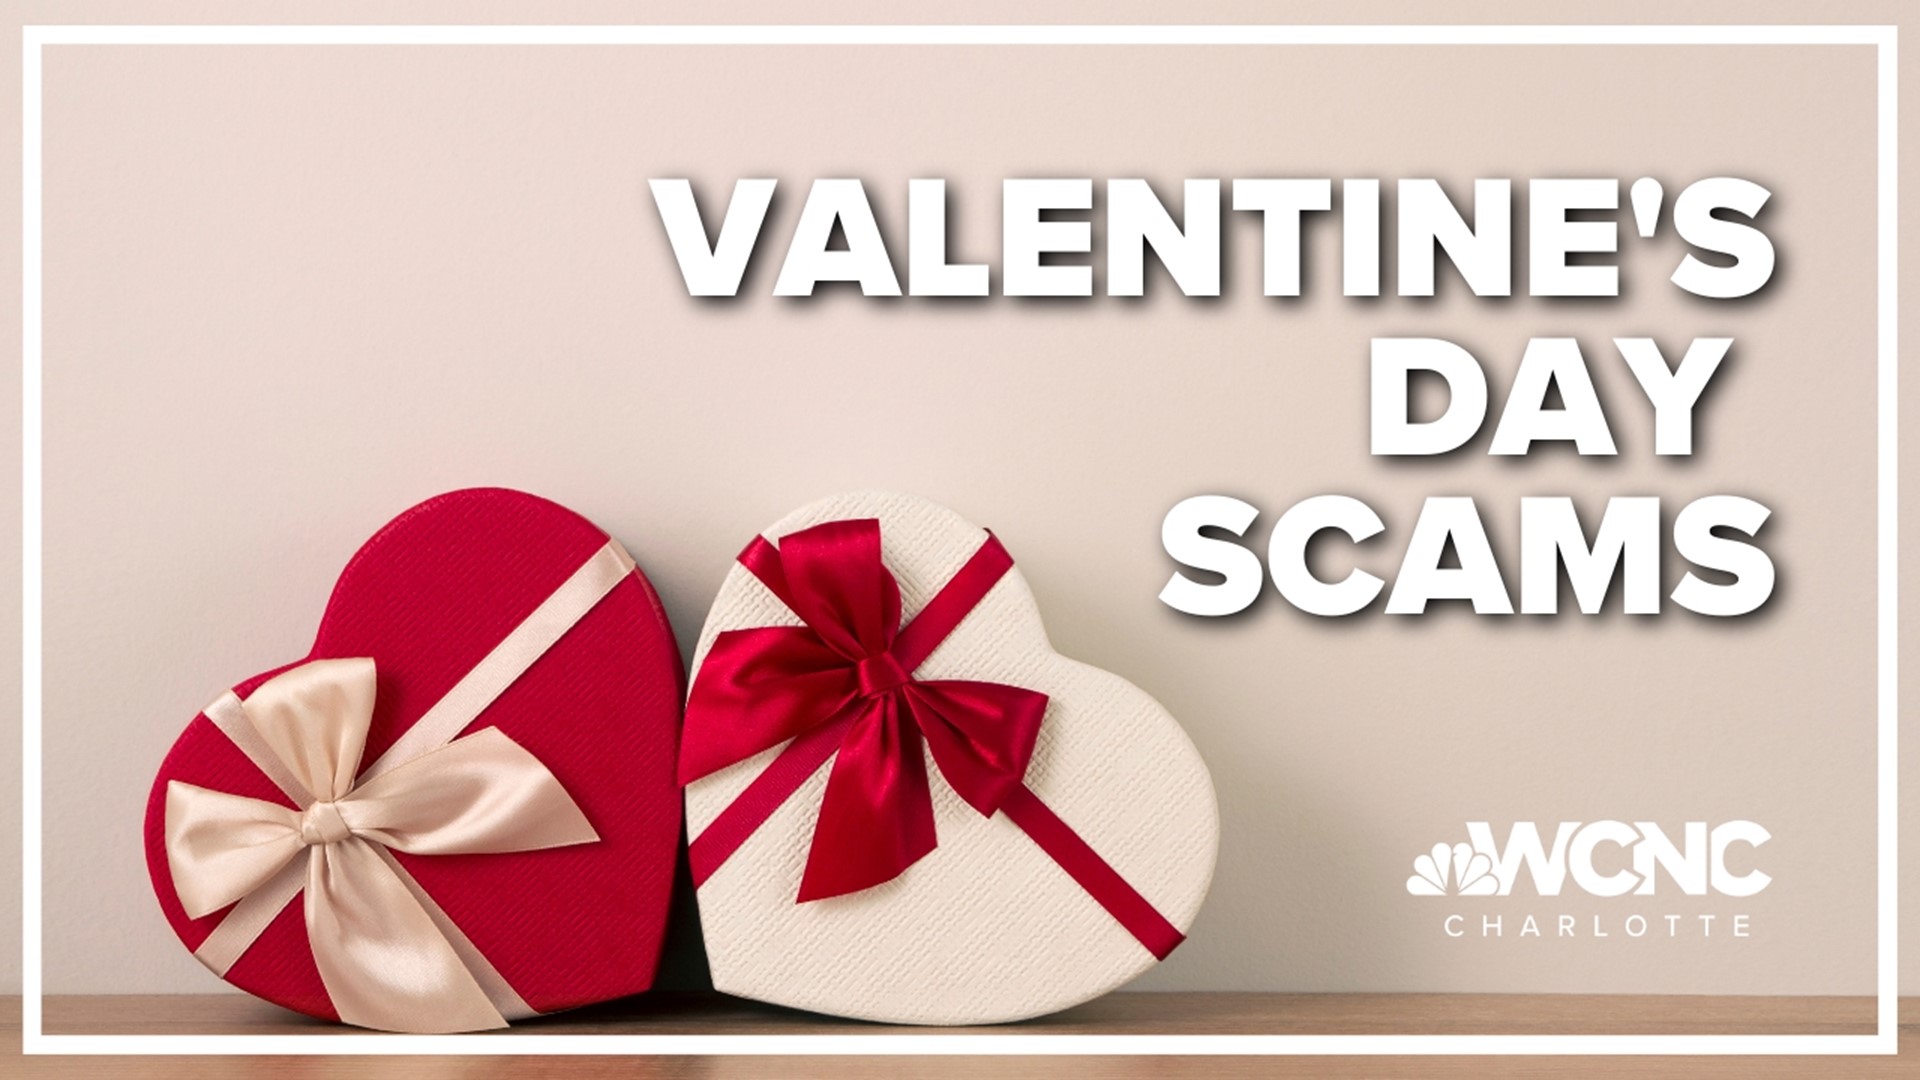 Valentine's Day is right around the corner and although this special day is meant for showing loved ones some extra TLC, some people are falling victim to scams.